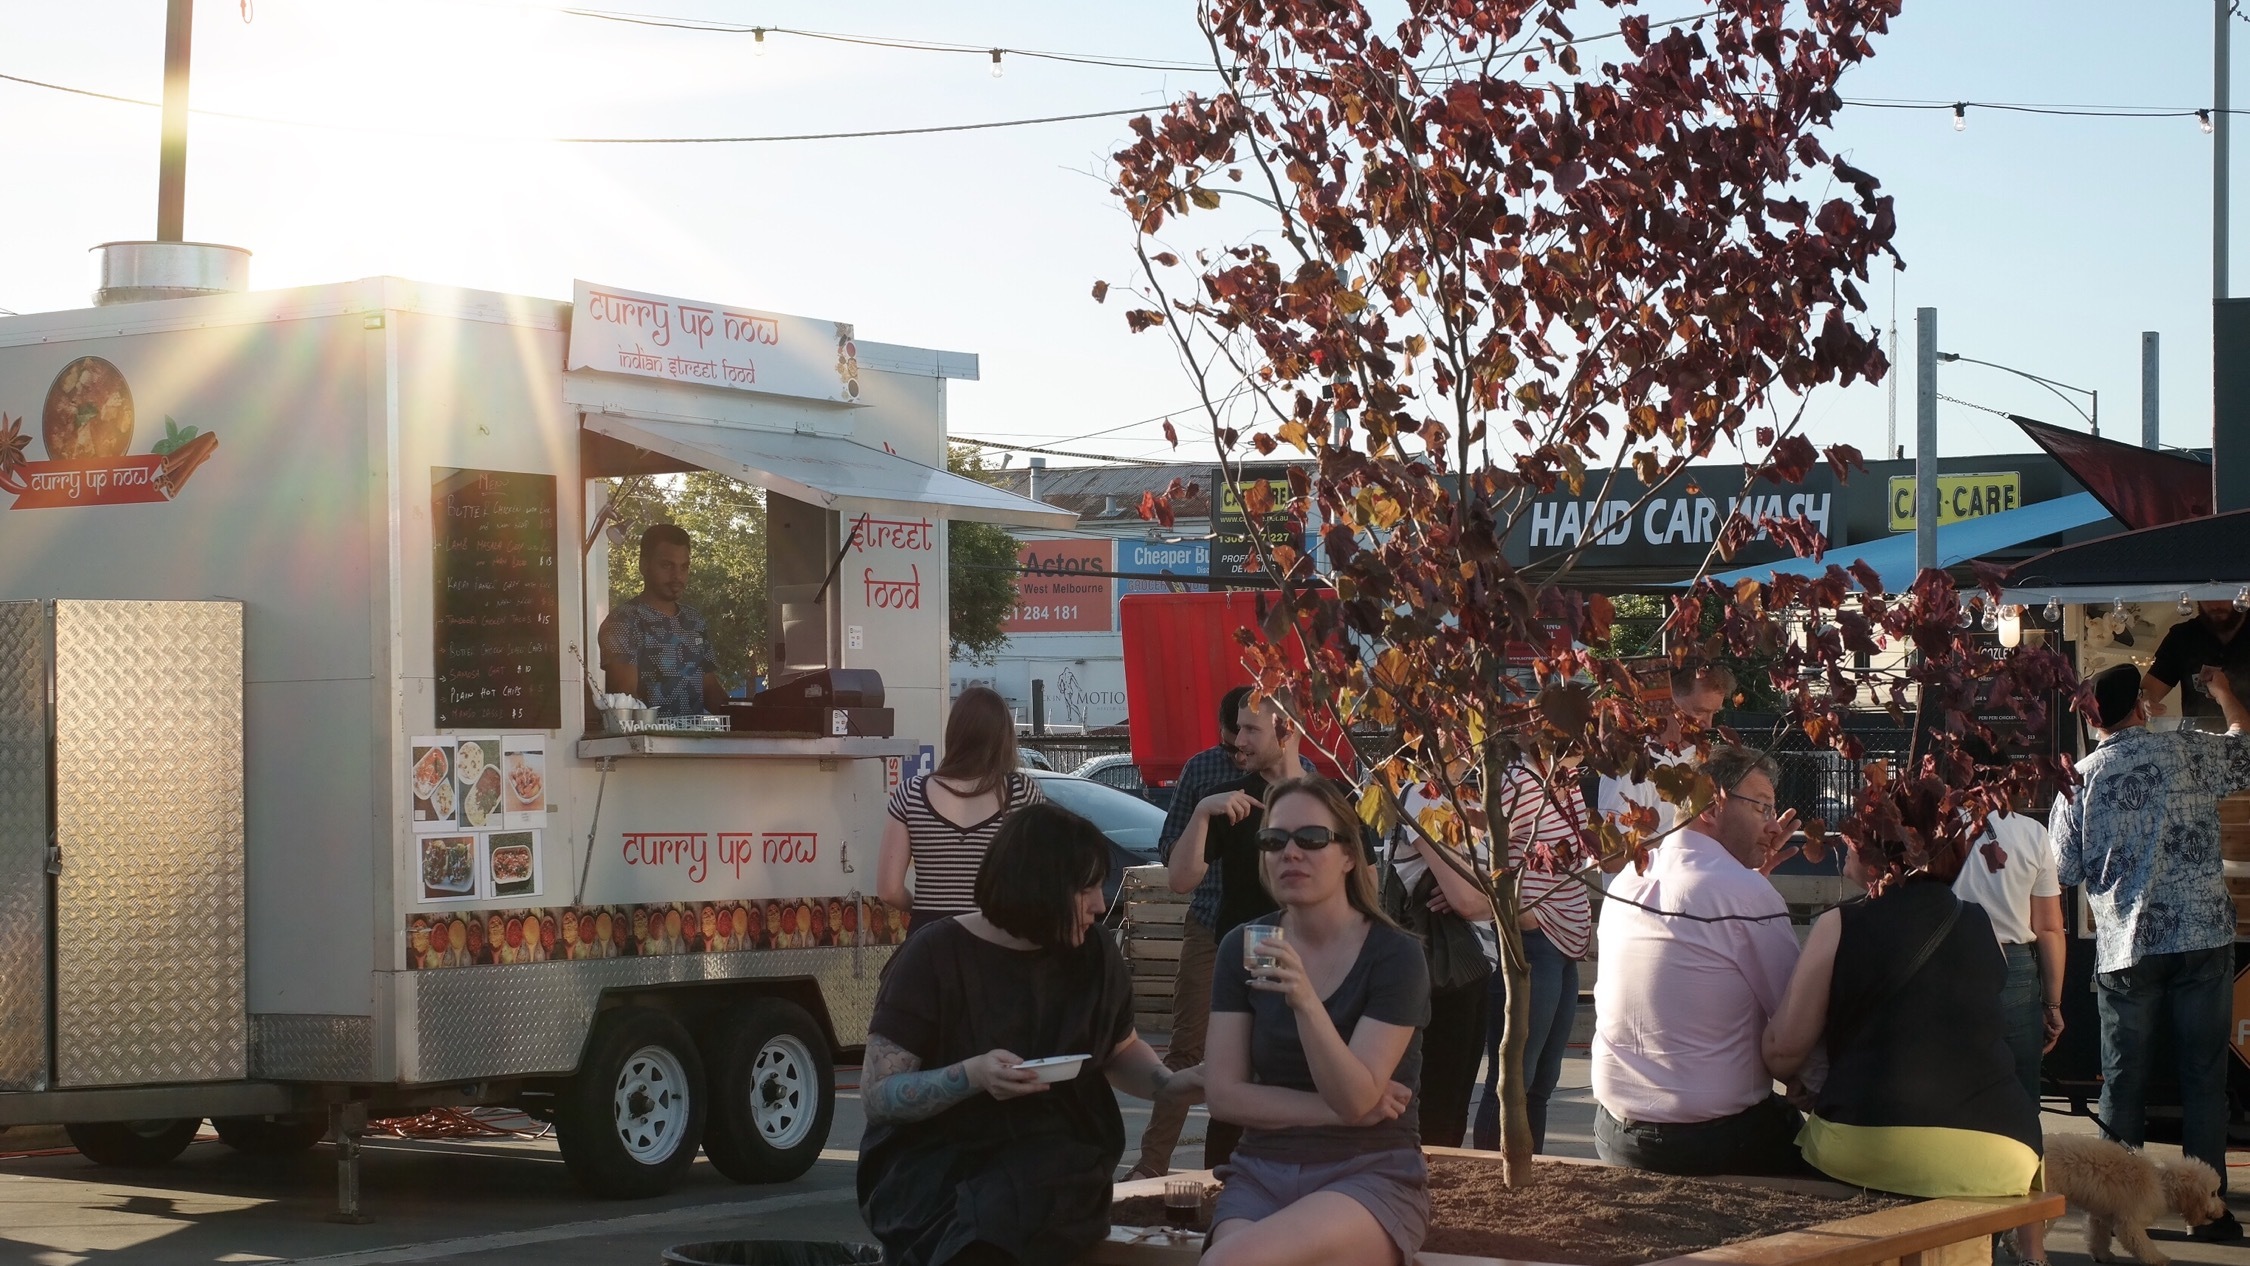 The Food Trucks in Melbourne